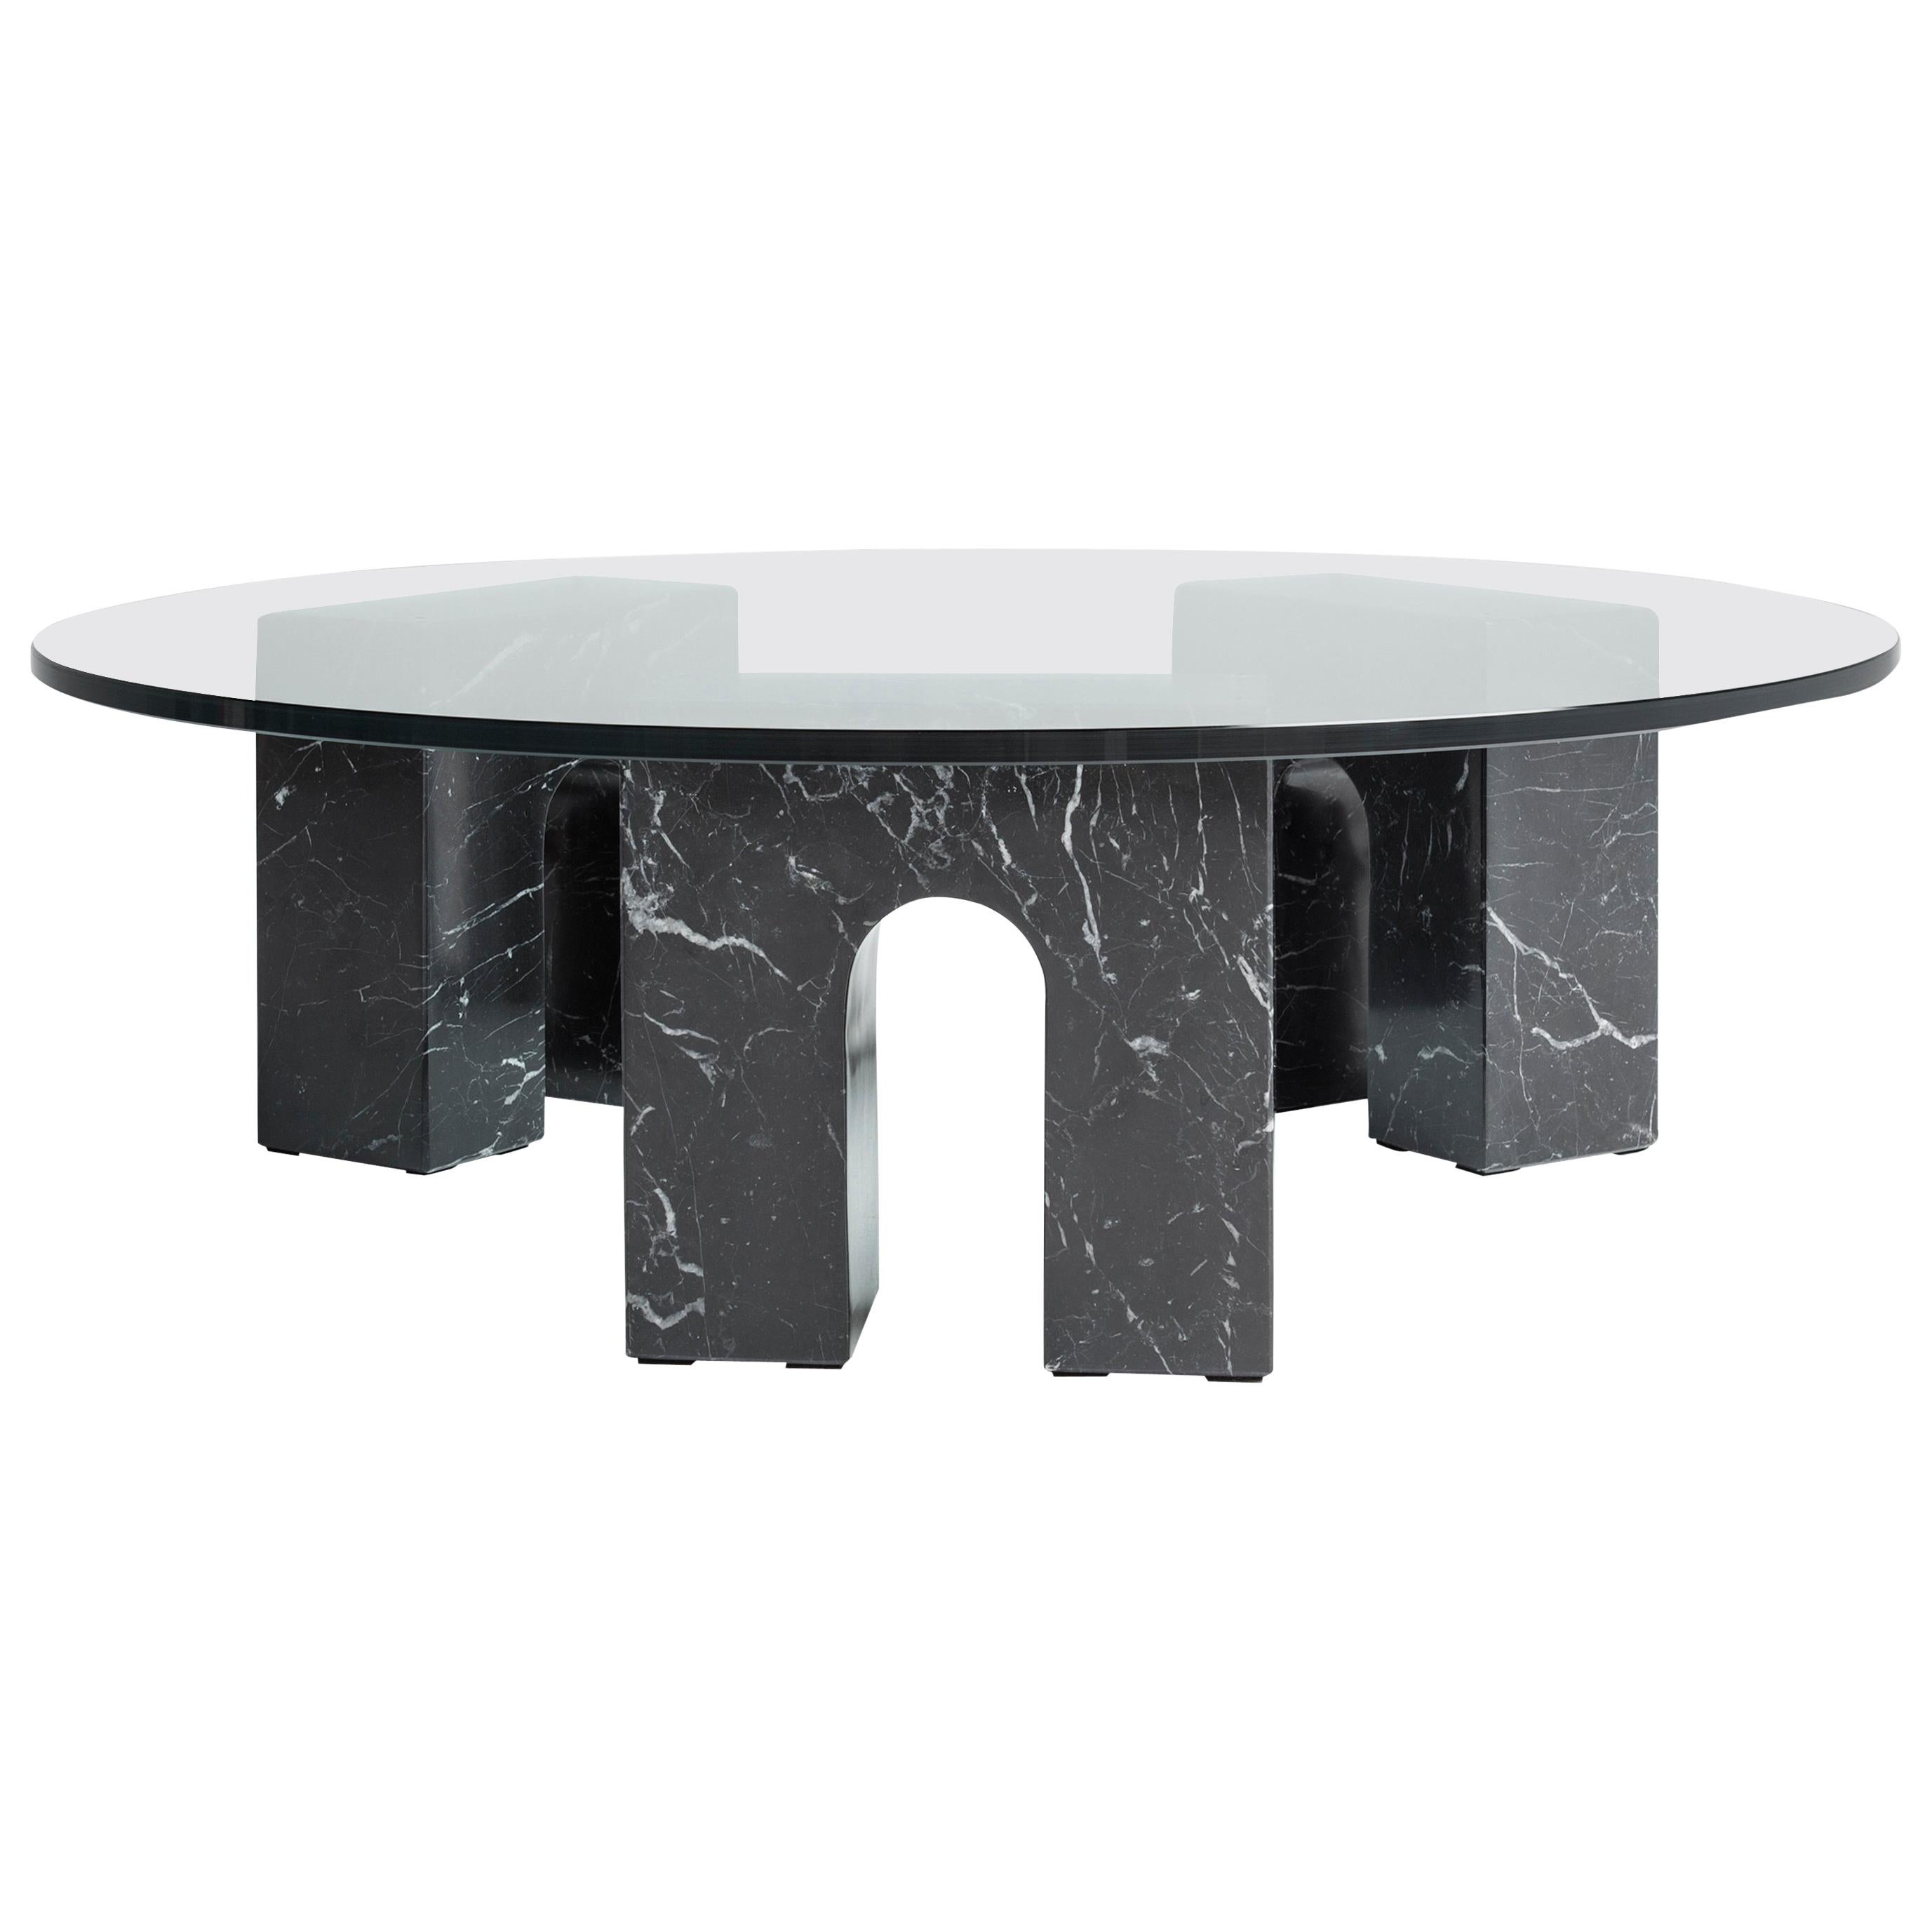 “Arch Table” Black Marquina Marble and Glass Minimalist Coffee Table